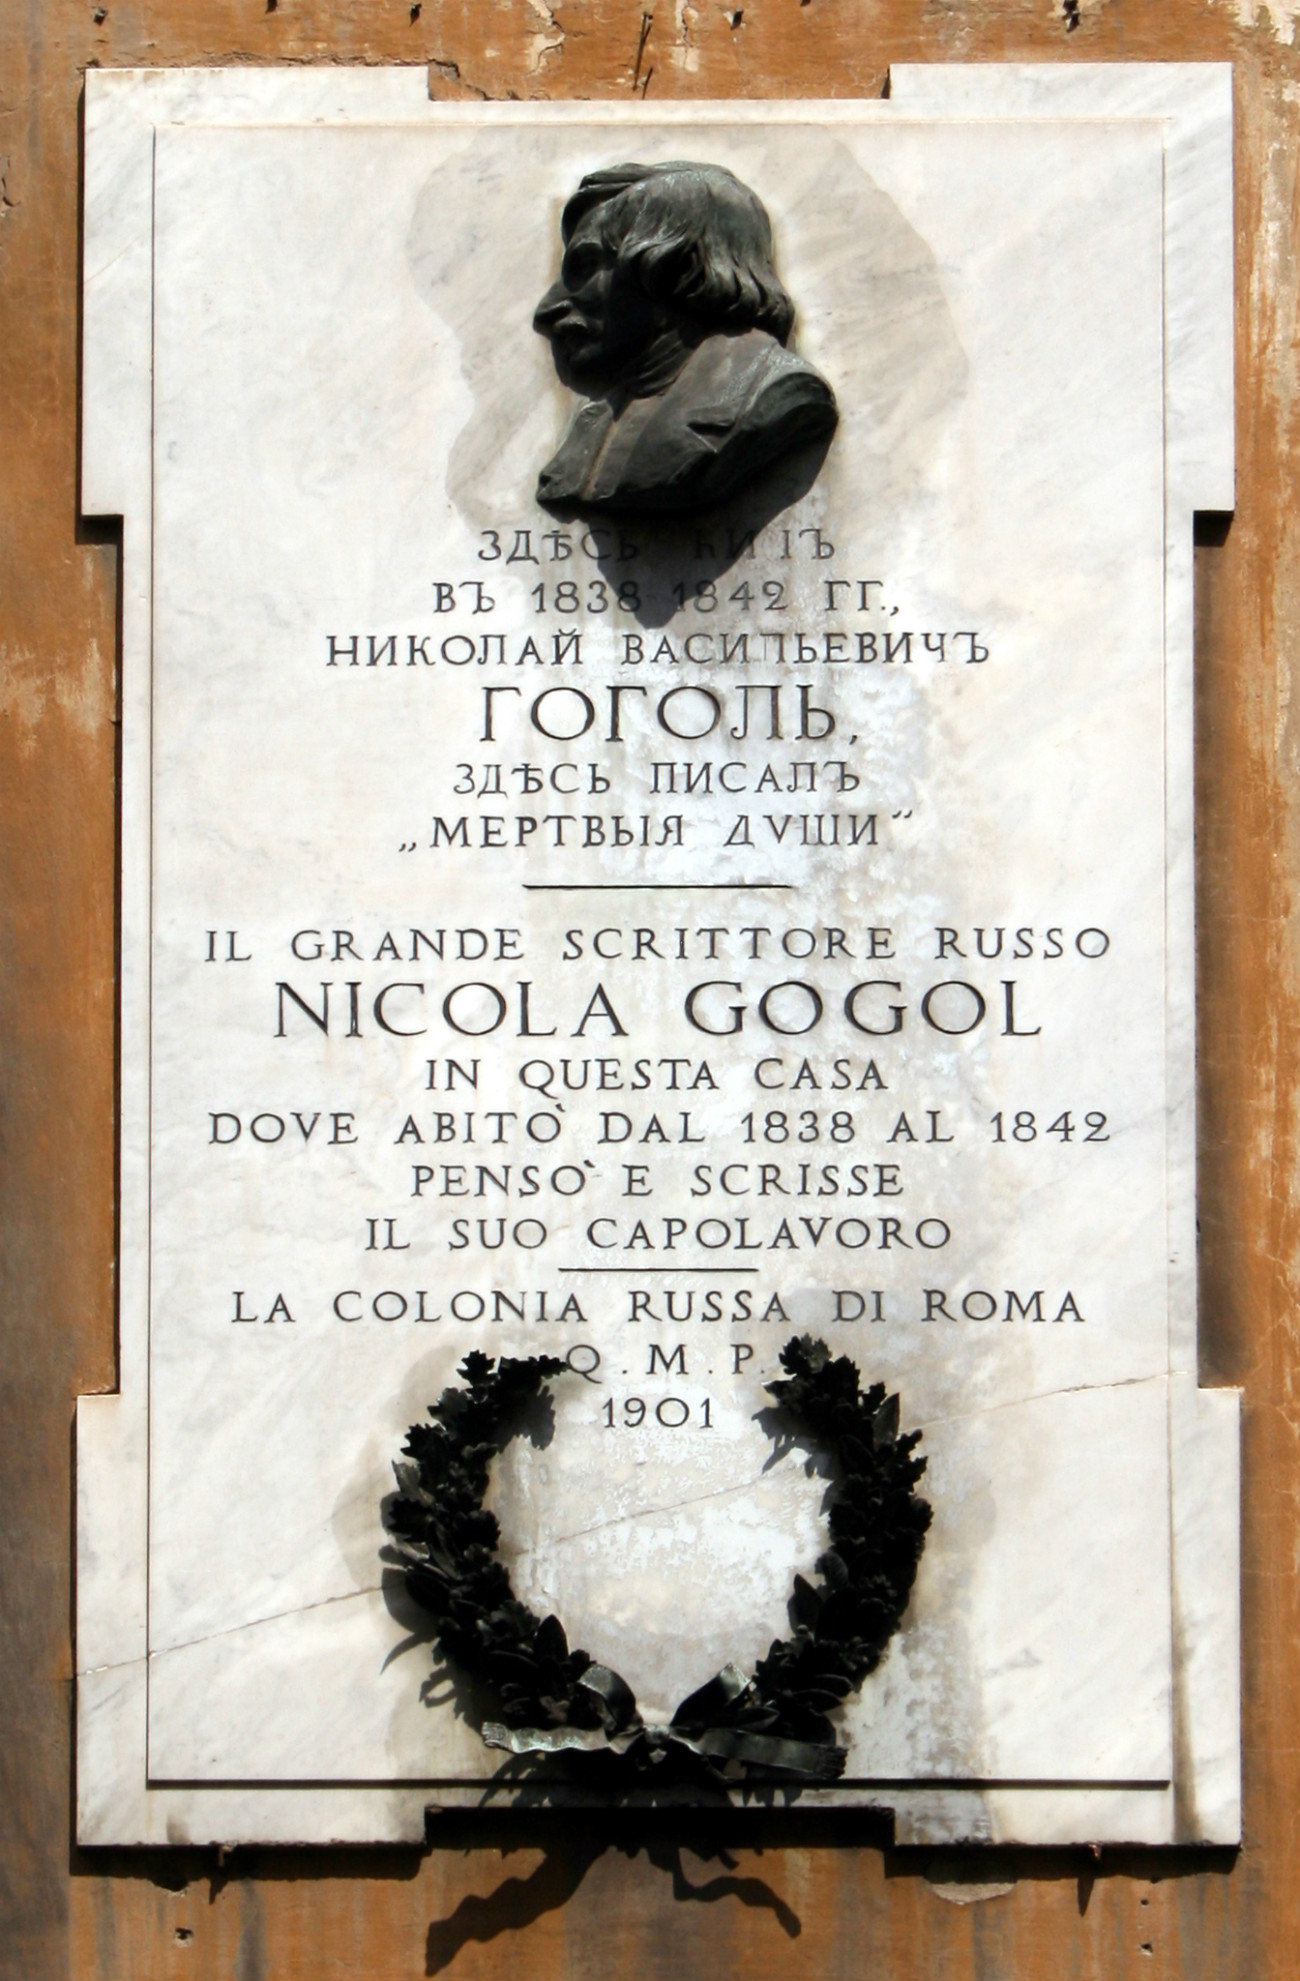 Plaque commemorating Nikolai Gogol's staying in Rome 1838-1842. / Source: Remi Jouan